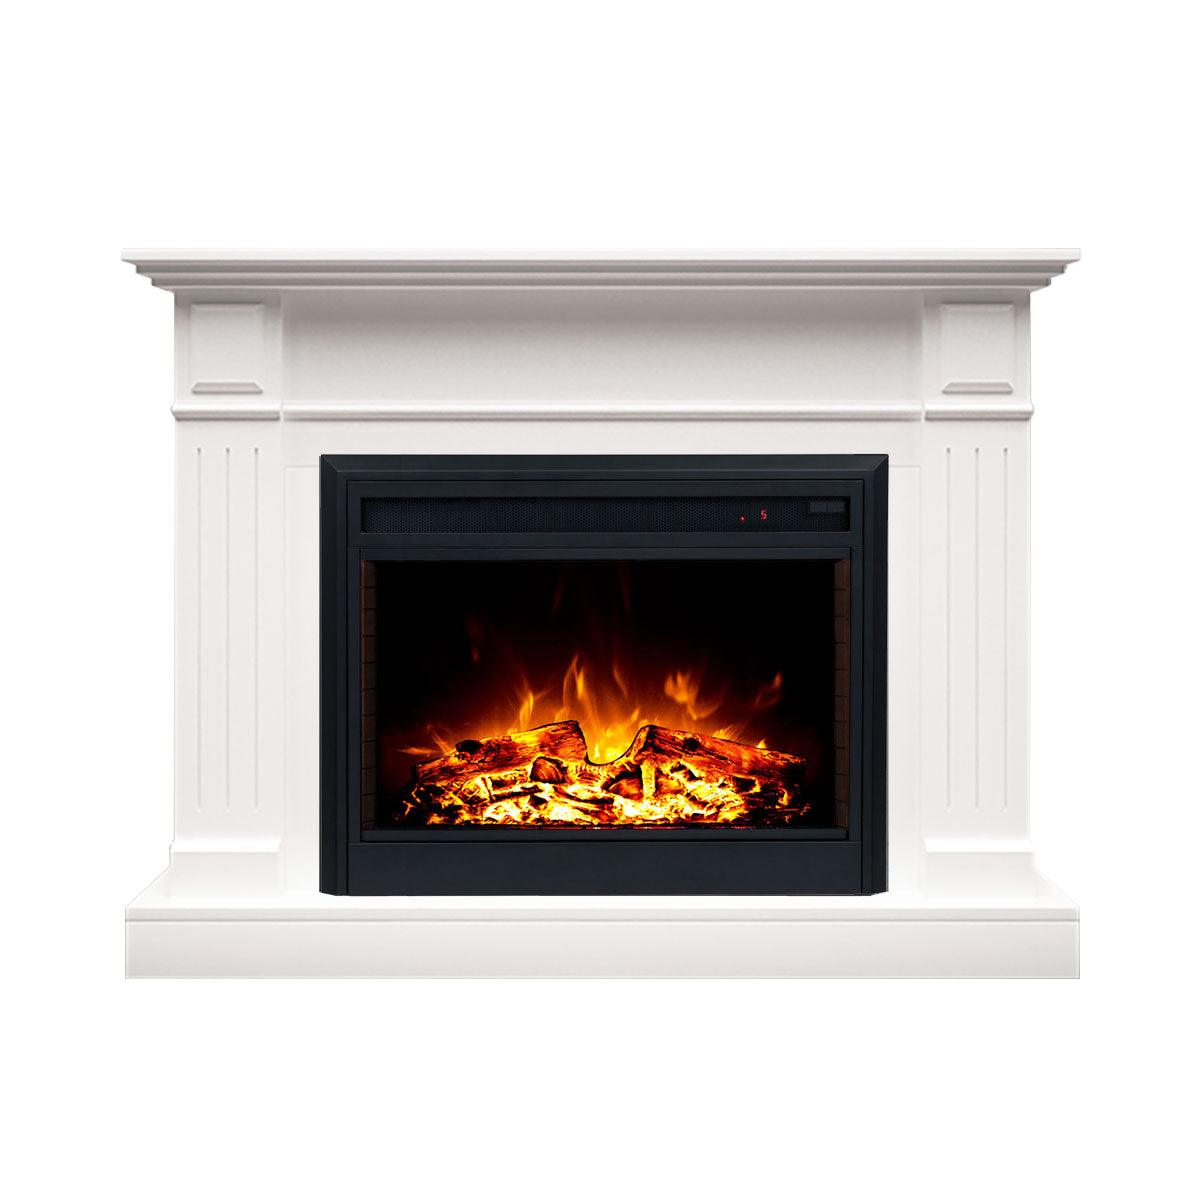 Berwick 2000W Electric Fireplace Heater White Mantel Suite with 30" Moonlight Insert